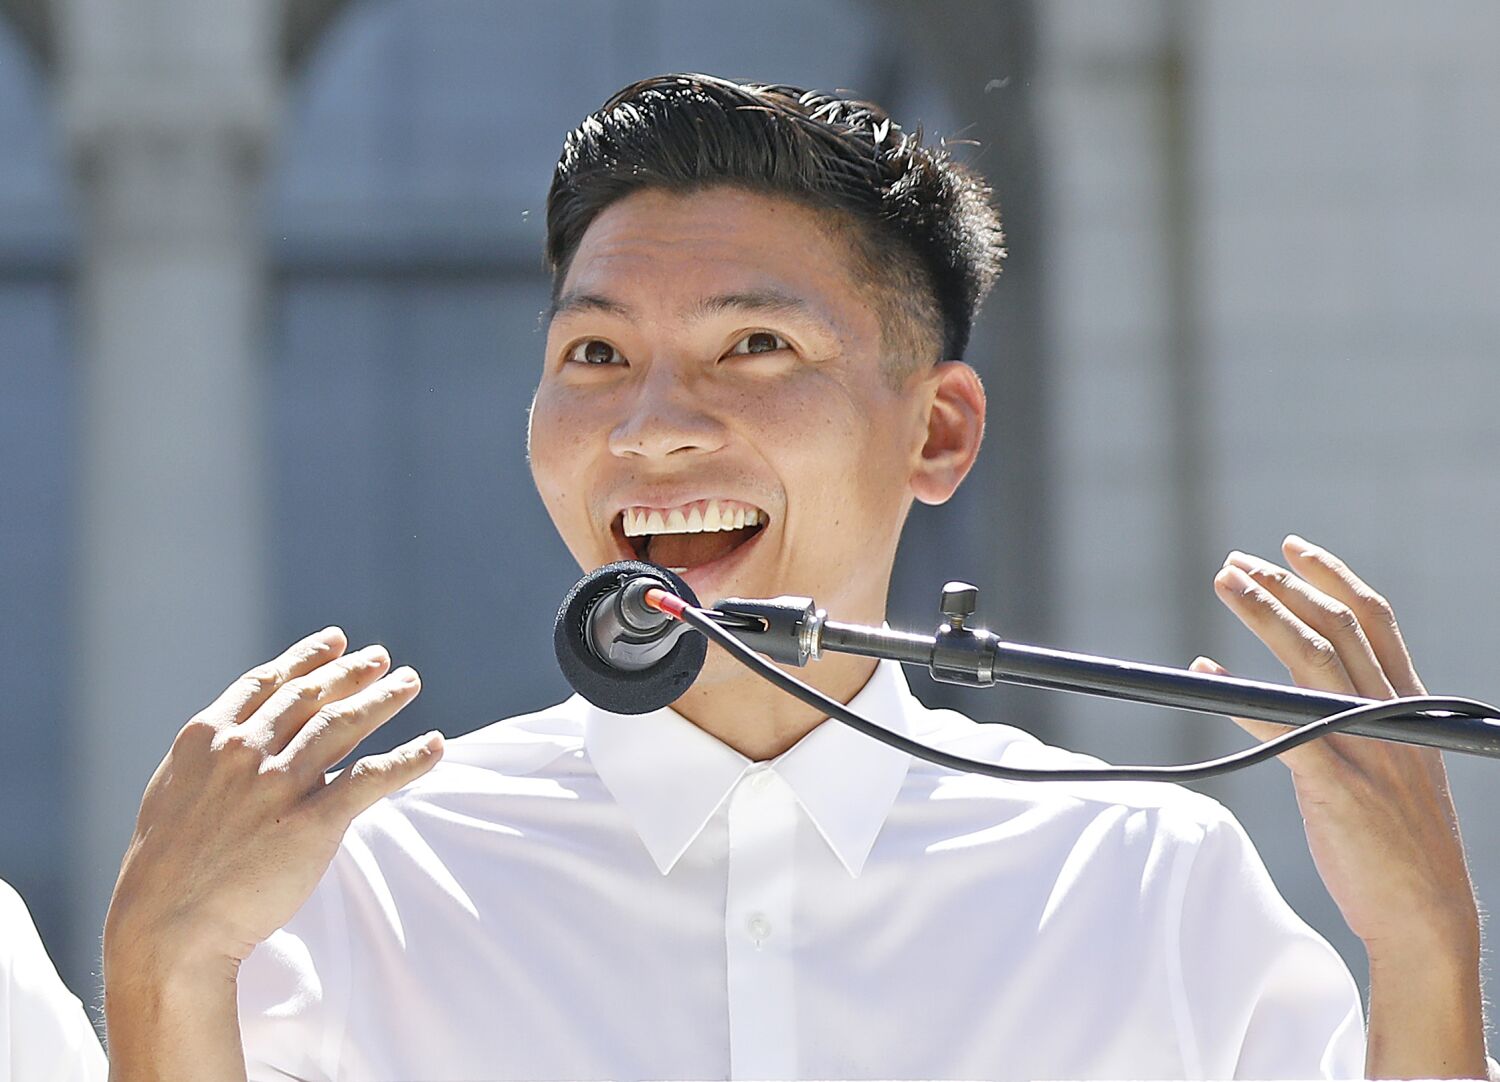 Young activists helped elect Kenneth Mejia. Now some say he's a 'toxic' boss